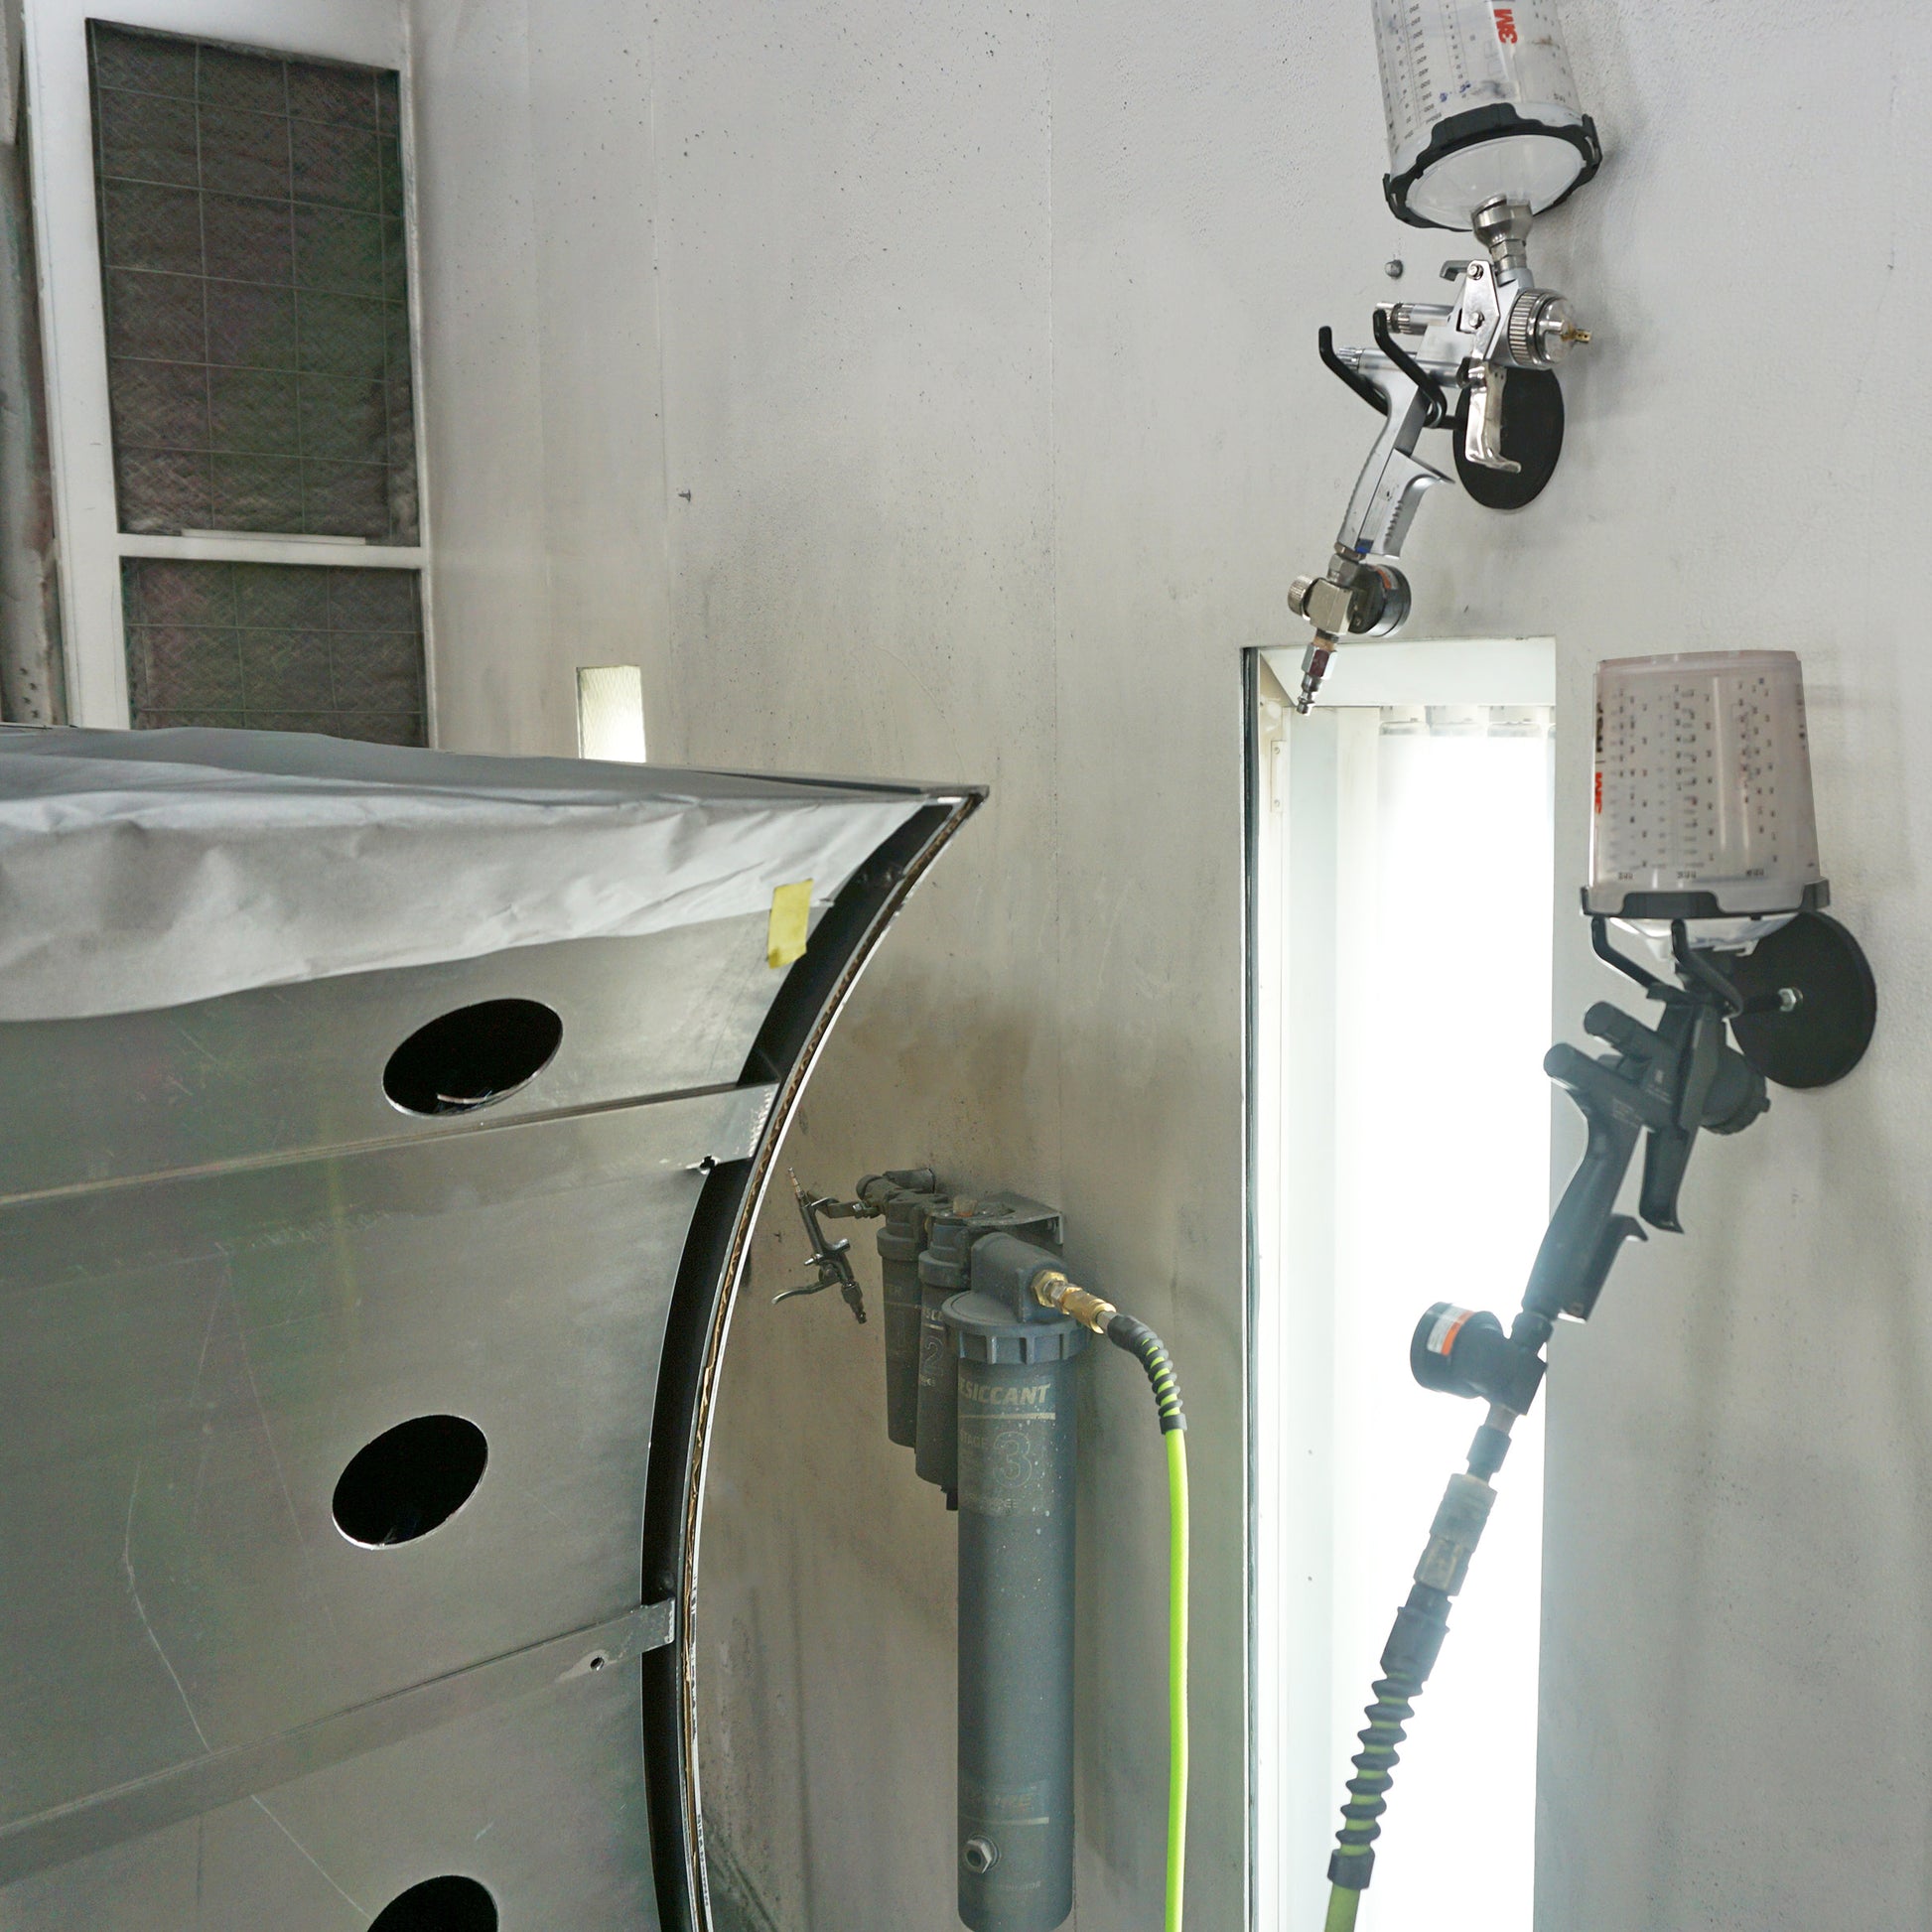 Load image into Gallery viewer, PGHNADR351 Magnetic Spray Gun Holder - In Use